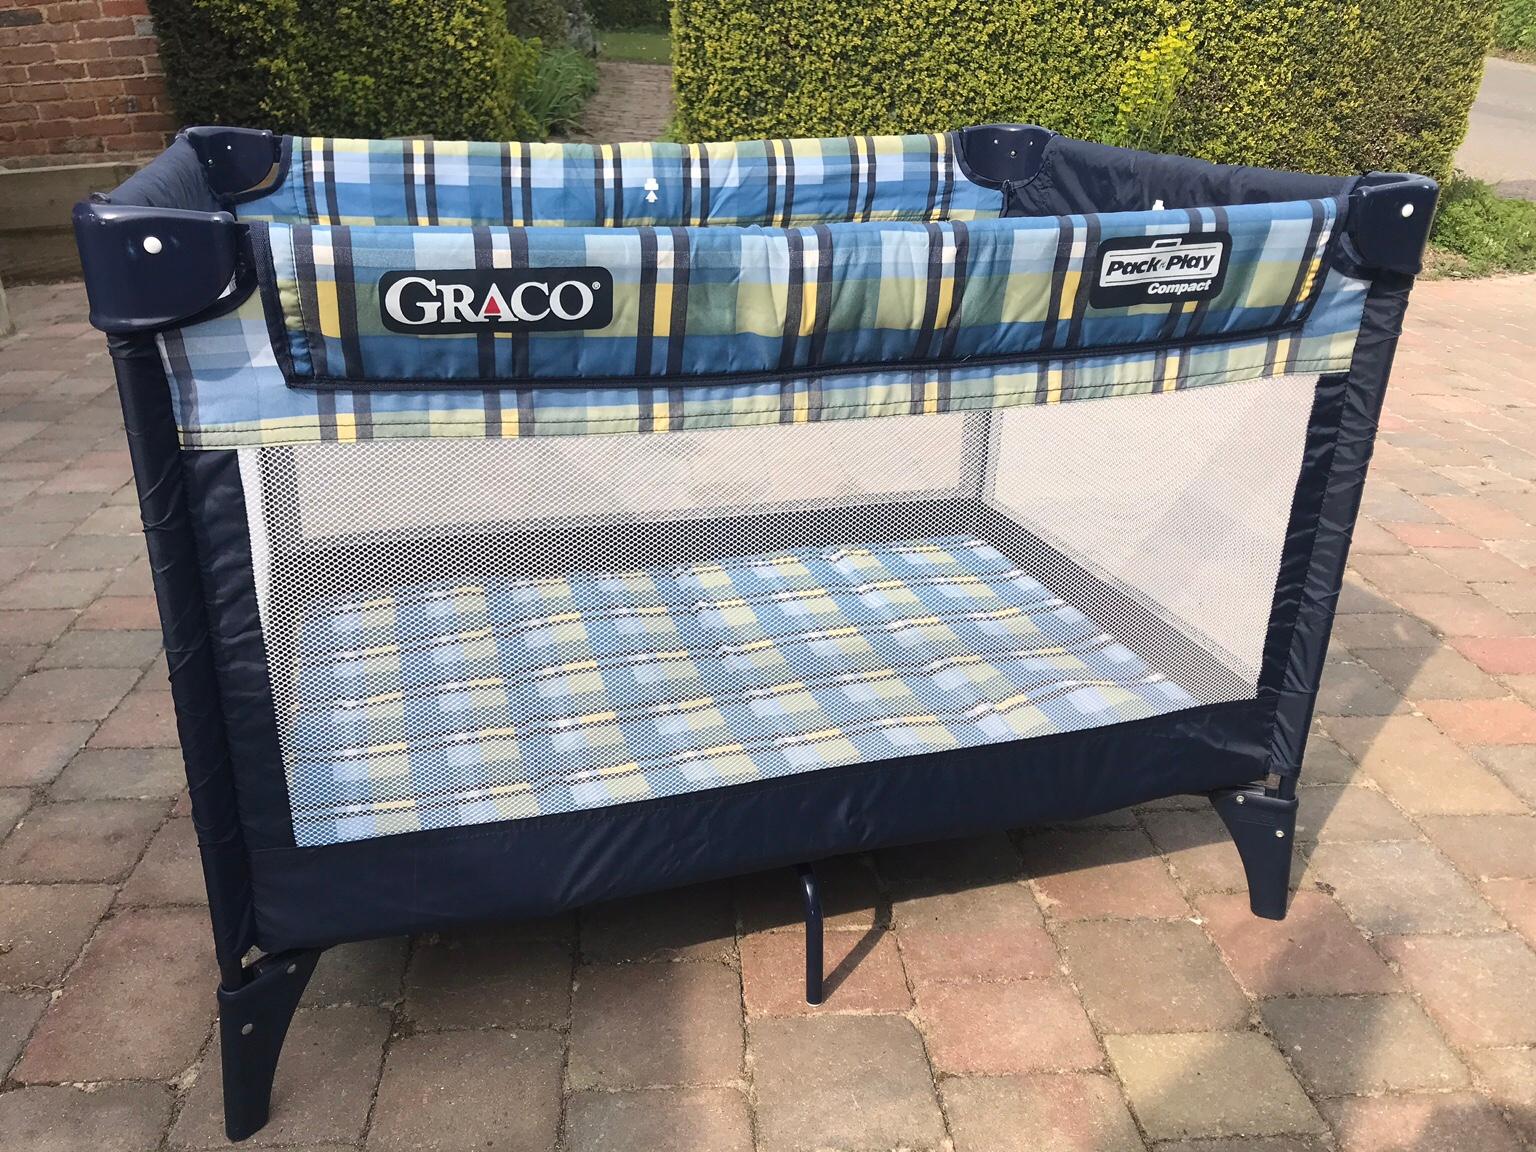 graco pack n play compact travel cot